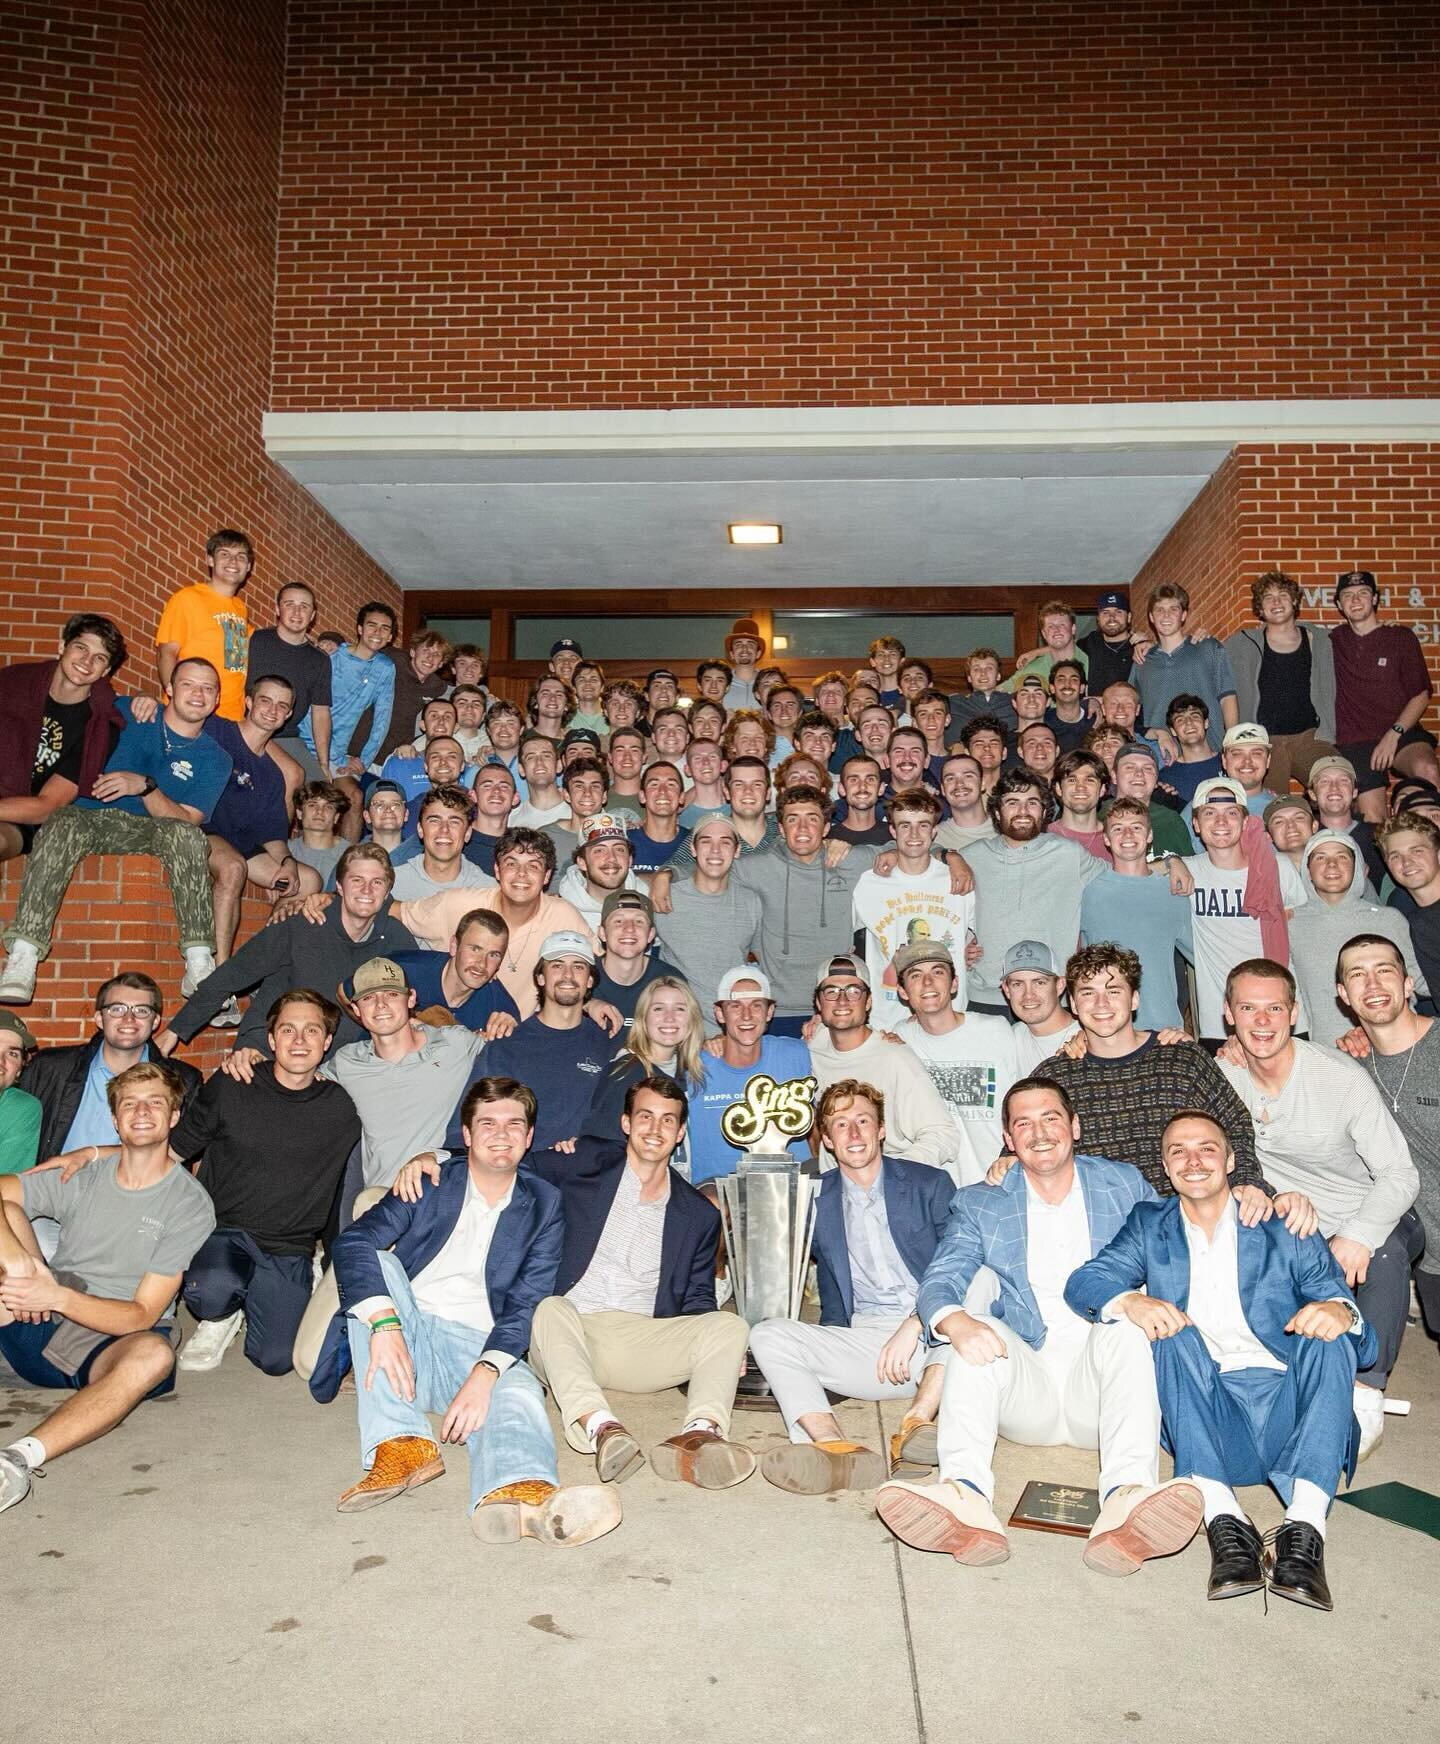 Your first place all university Sing winner in 2024&hellip; KAPPA OMEGA TAU

#gorags